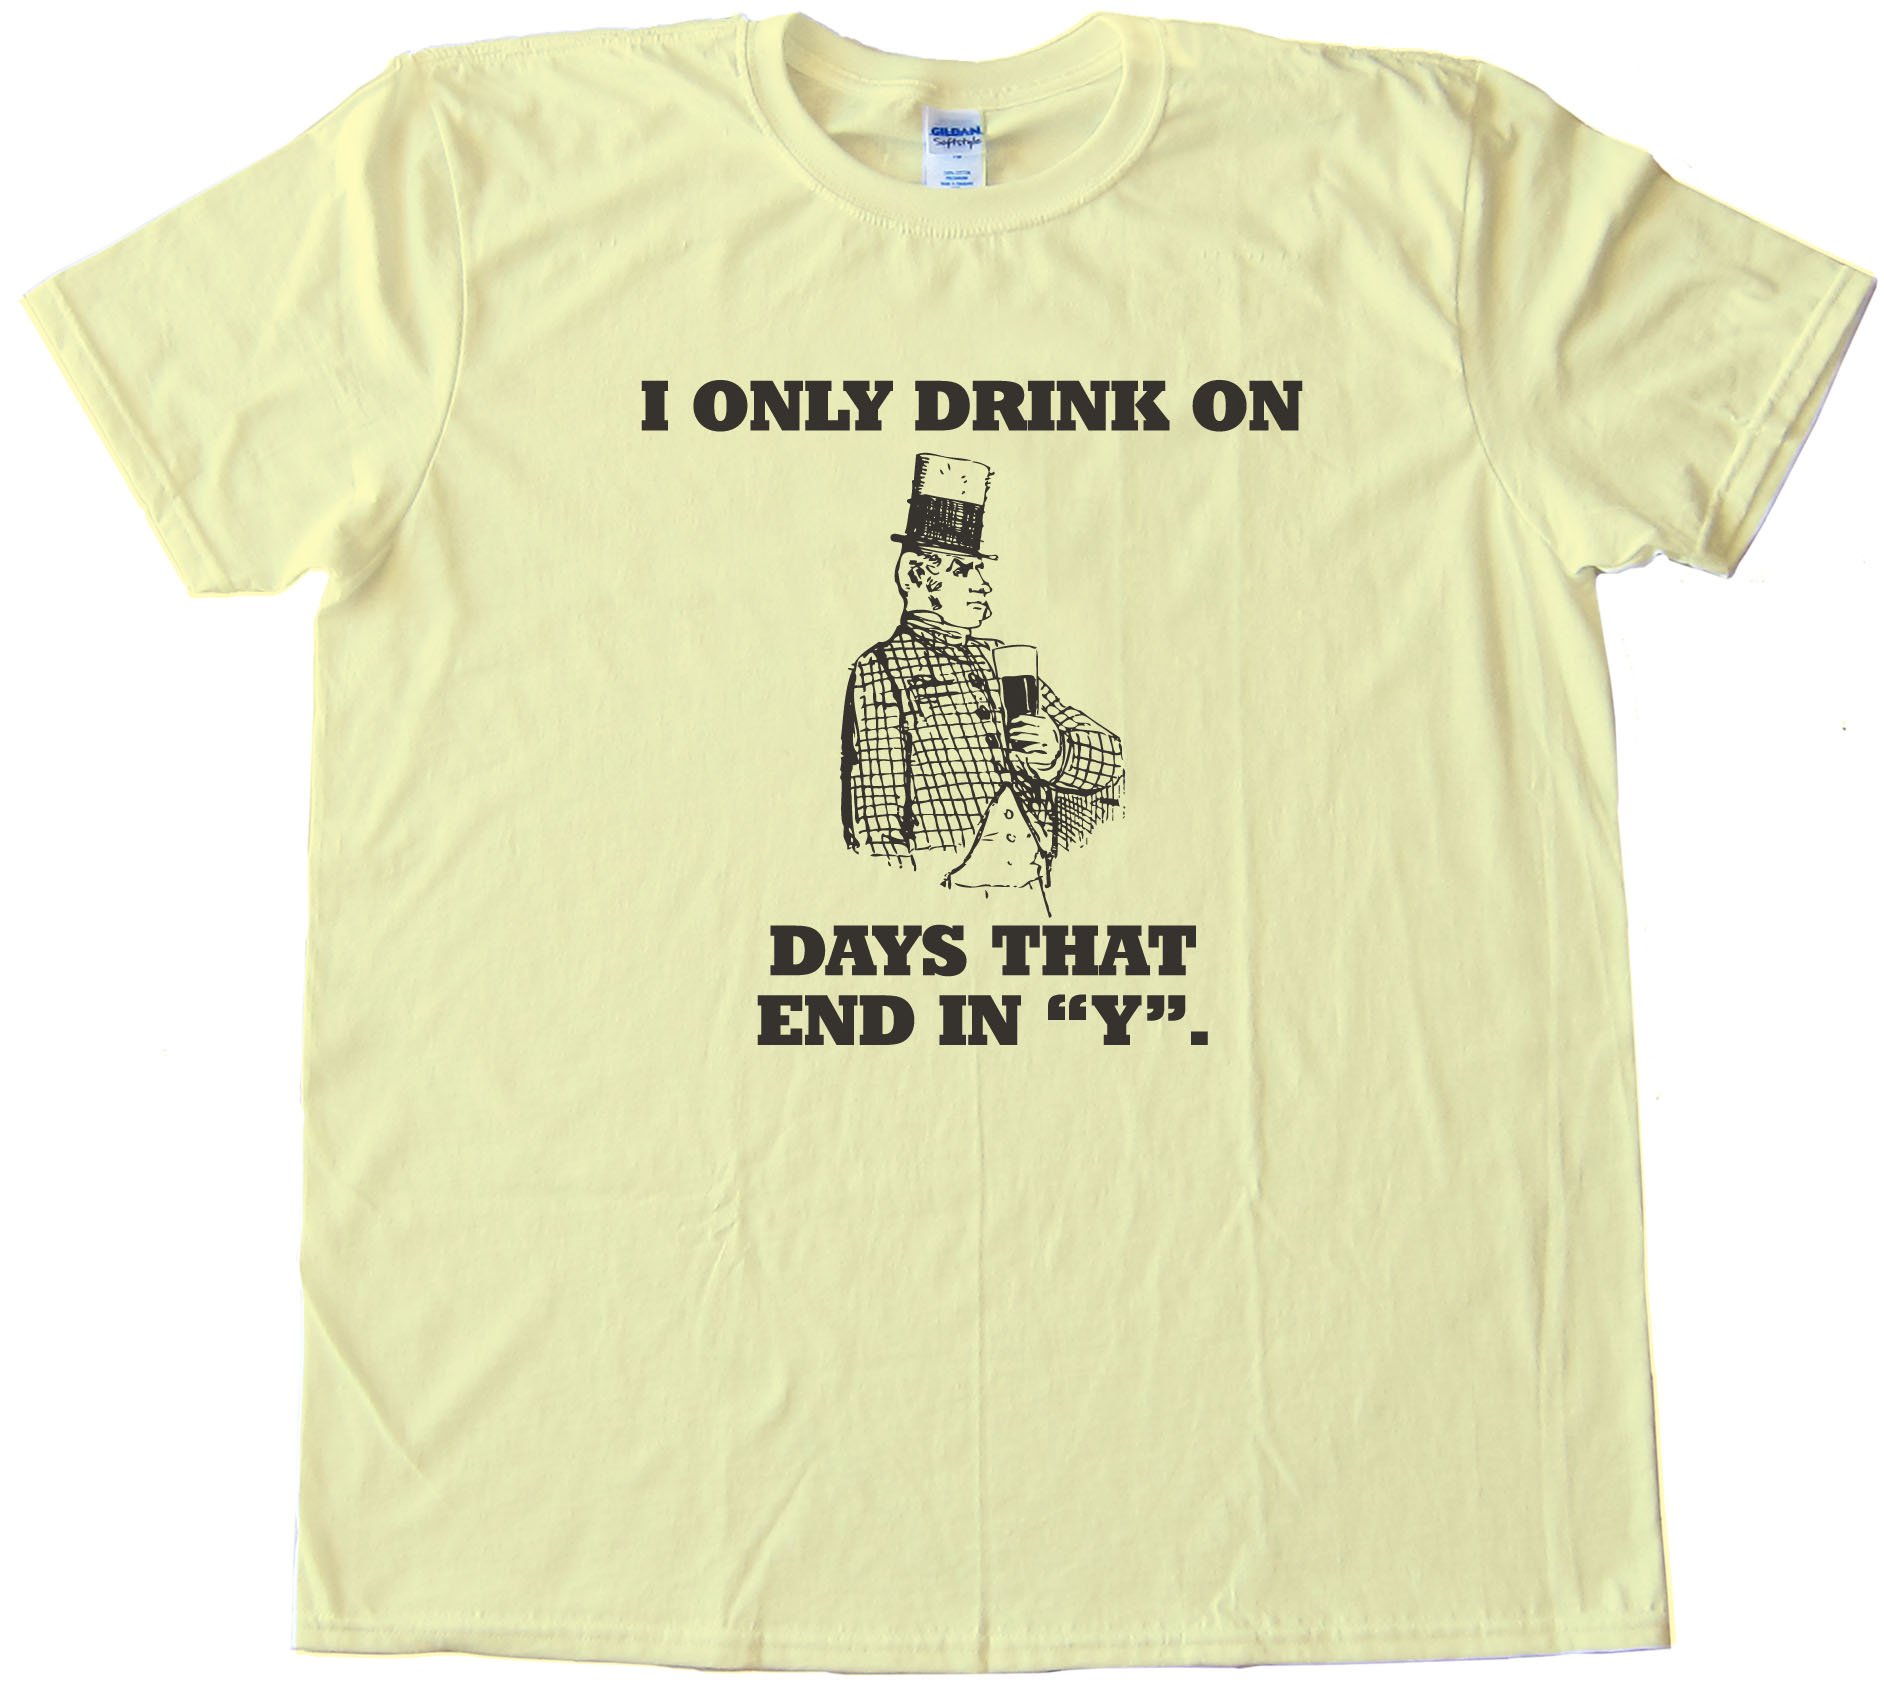 I Only Drink On Days That End In Y. Tee Shirt